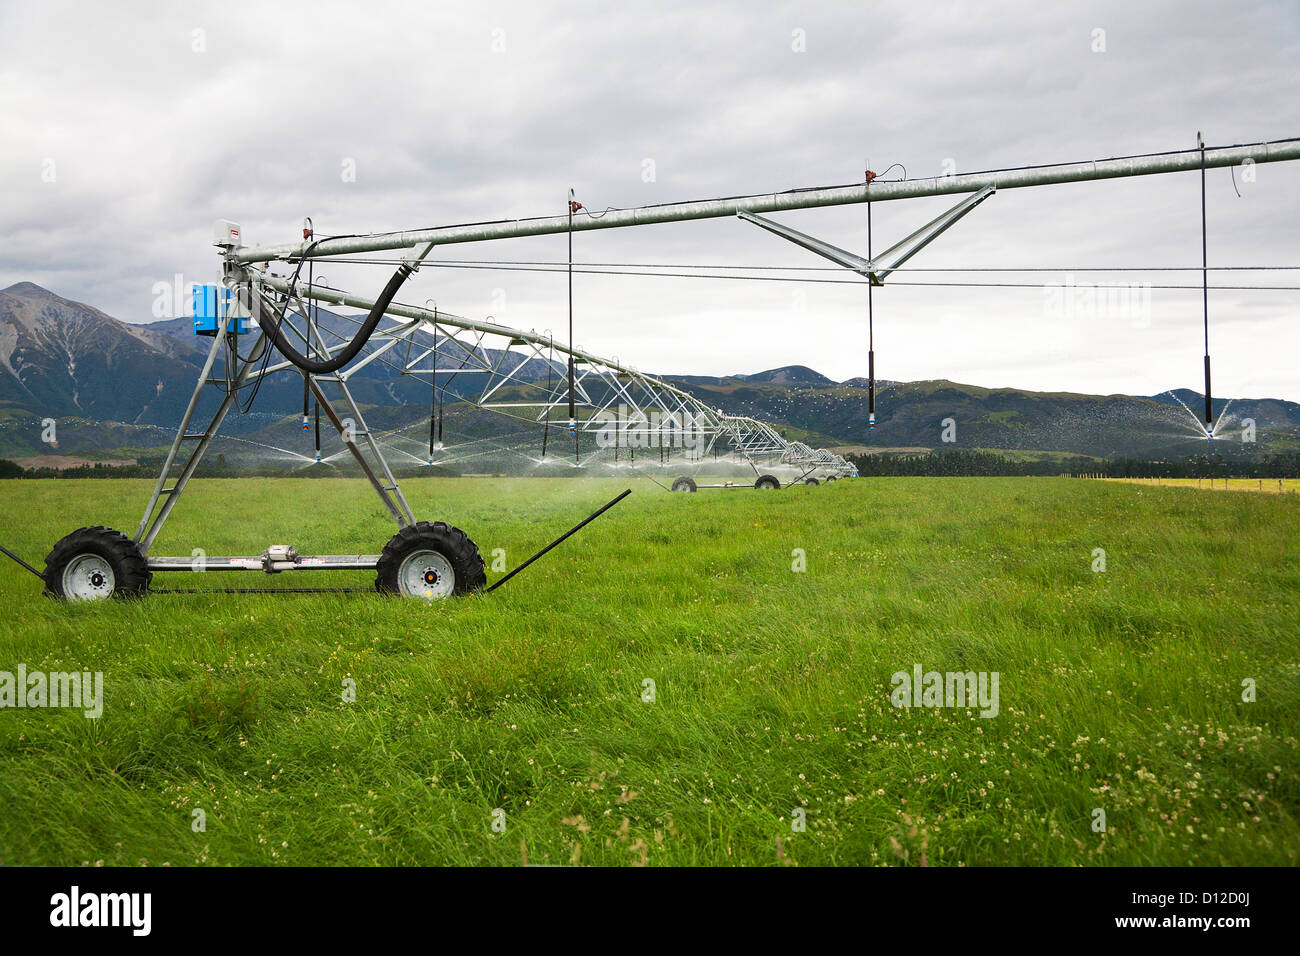 Irrigation system working in a field, watering pasture land. Canterbury, South Island, New Zealand. Stock Photo